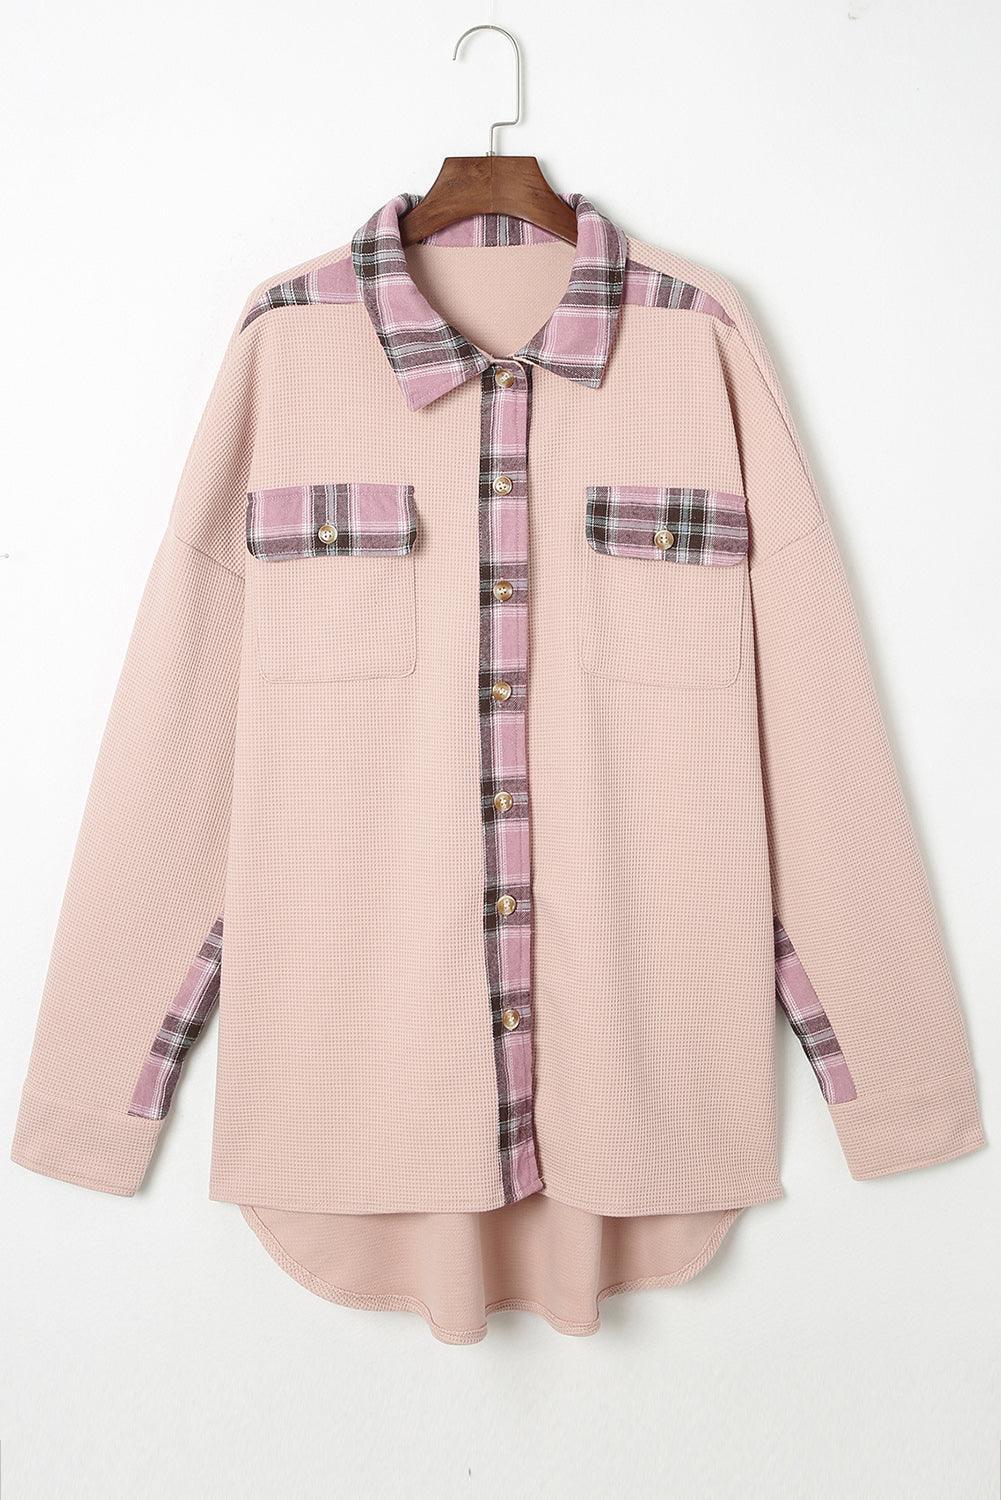 Simple Embrace Button Down Collared Plaid Shacket - MXSTUDIO.COM